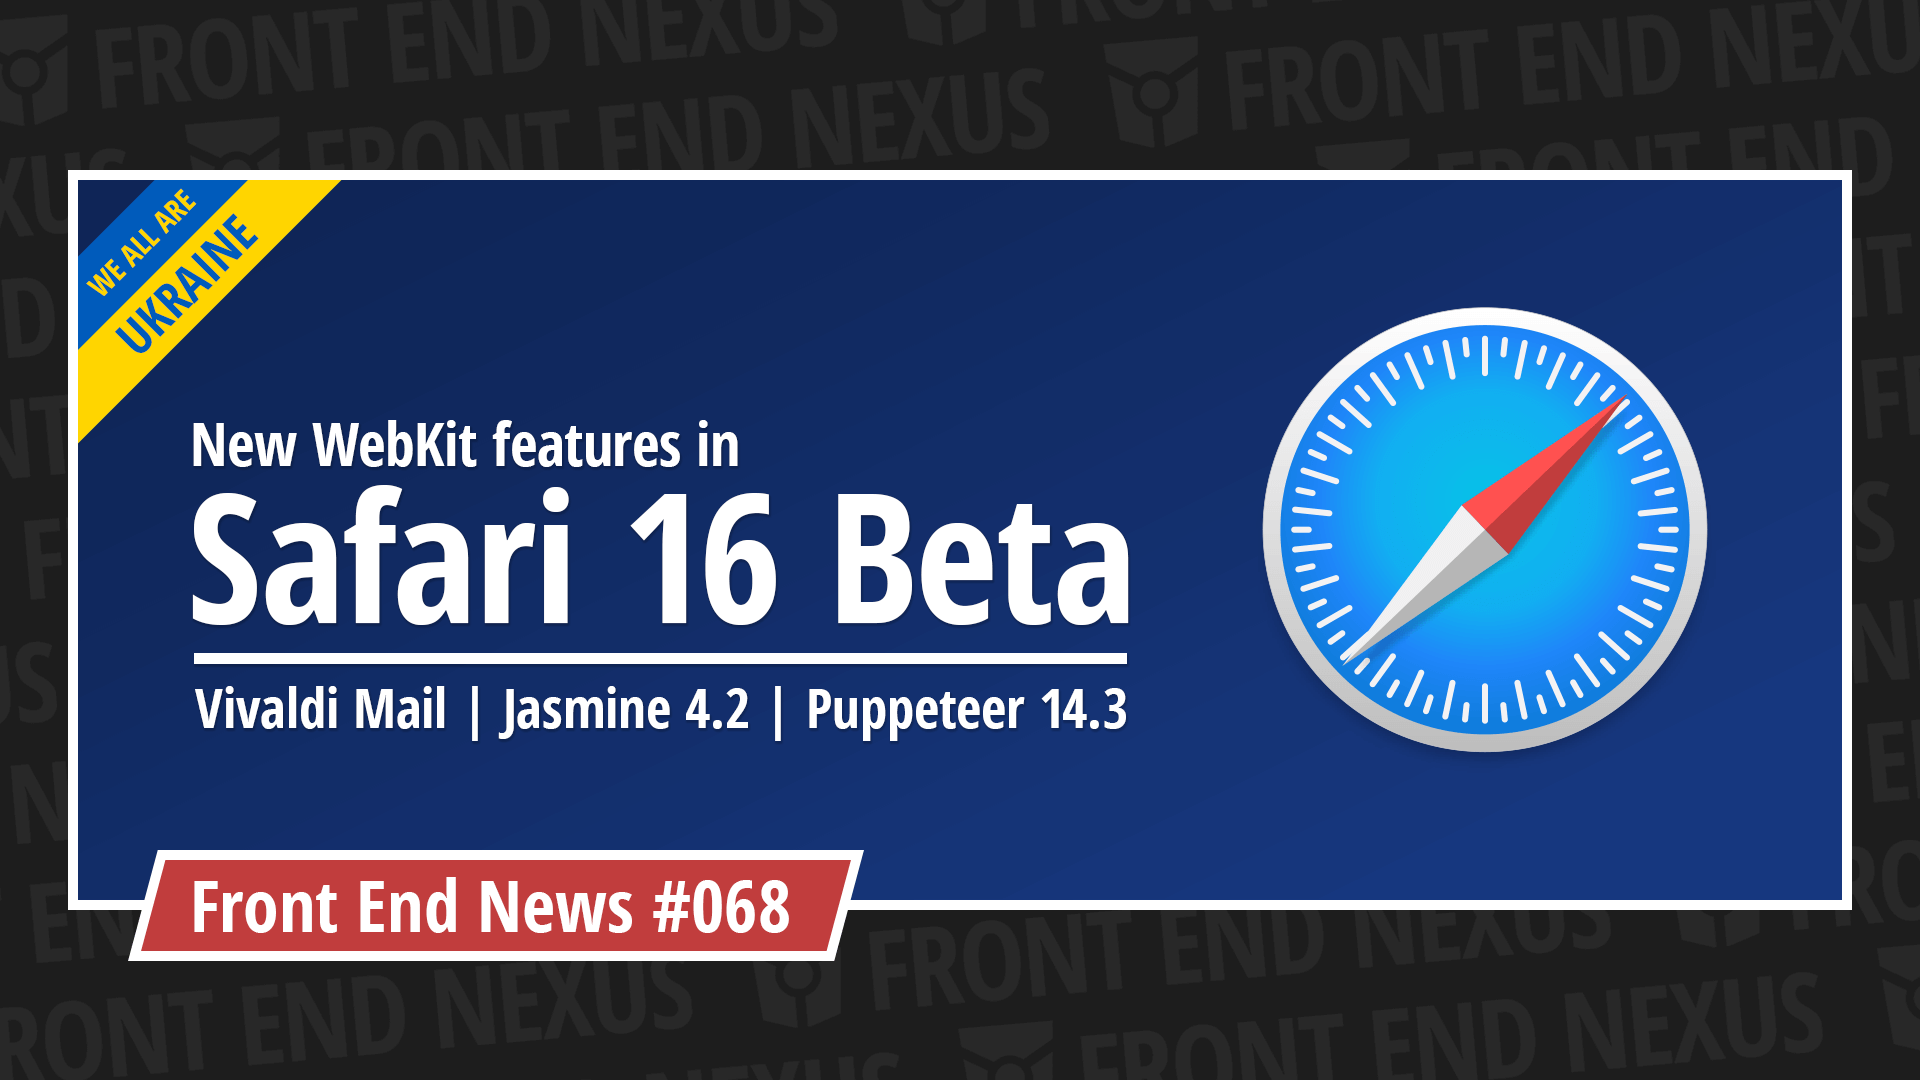 WebKit Features in Safari 16 Beta, Vivaldi Mail, Jasmine 4.2, Puppeteer 14.3, and more | Front End News #068